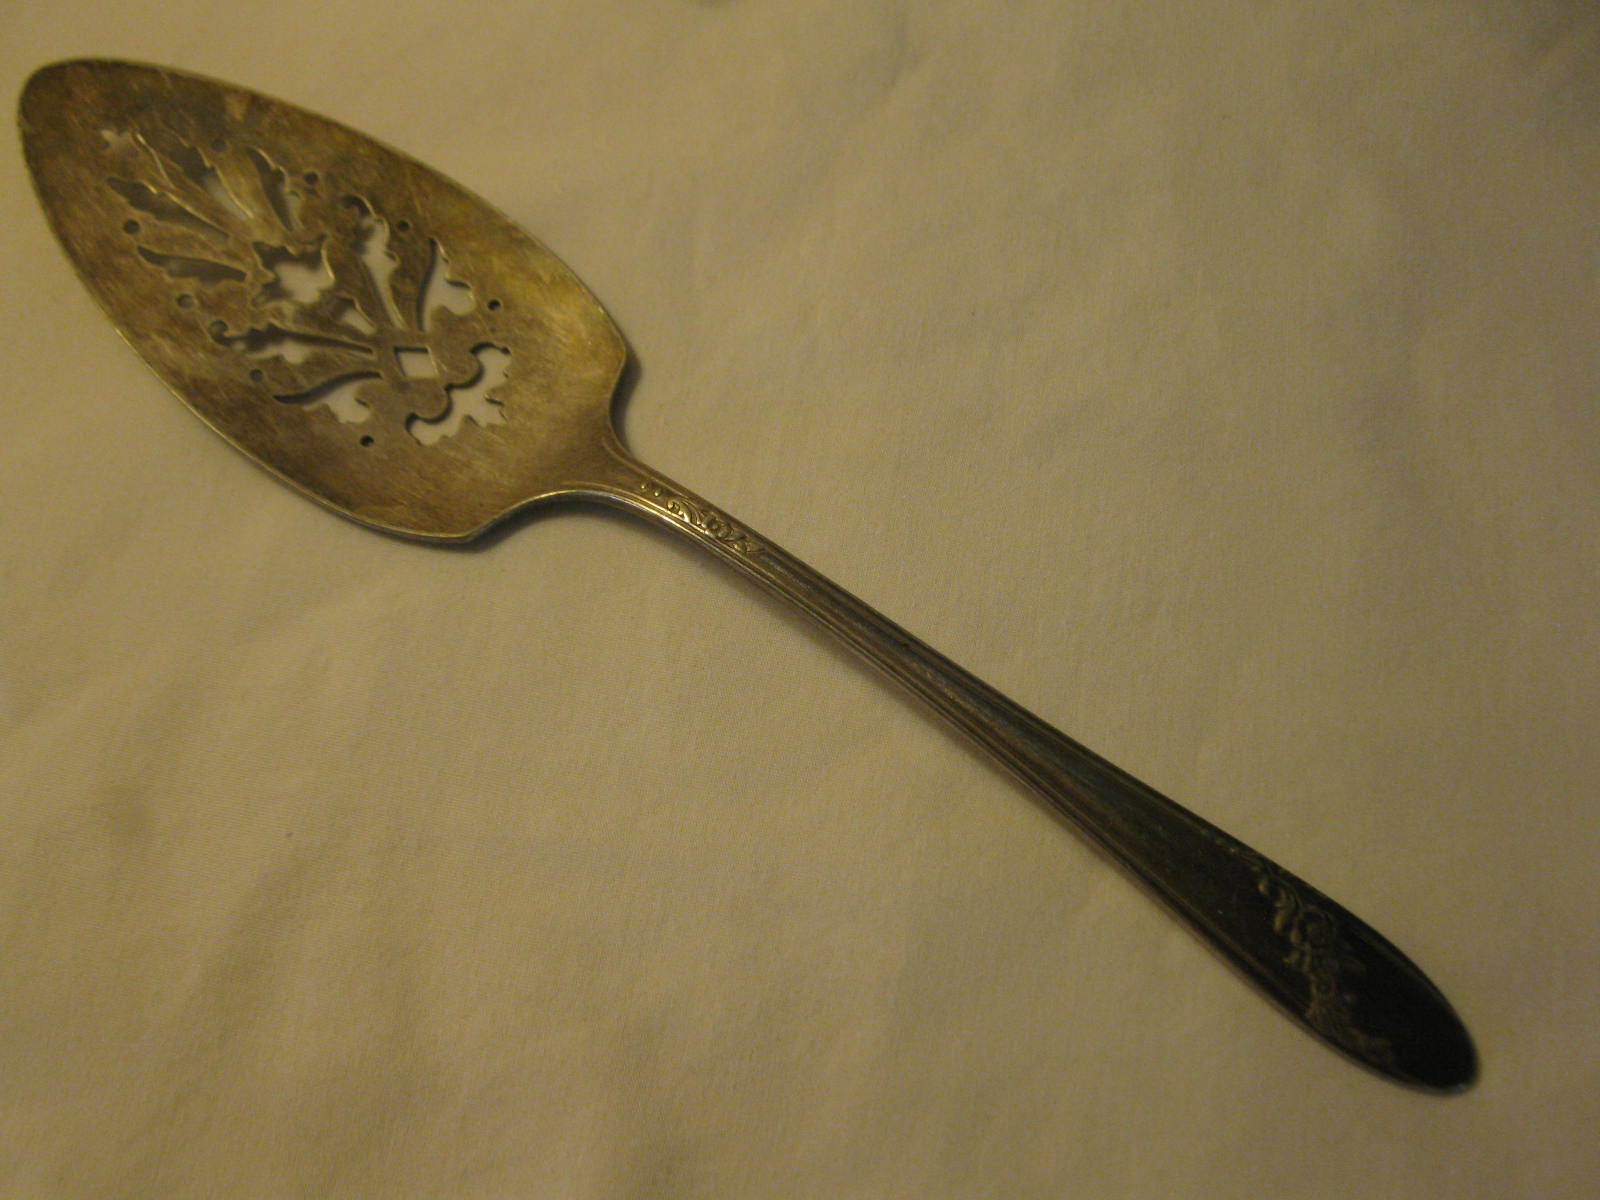 Community Tudor 1946 Queen Bess Pattern large 9.5" Silver Plated Cake Server - $12.00